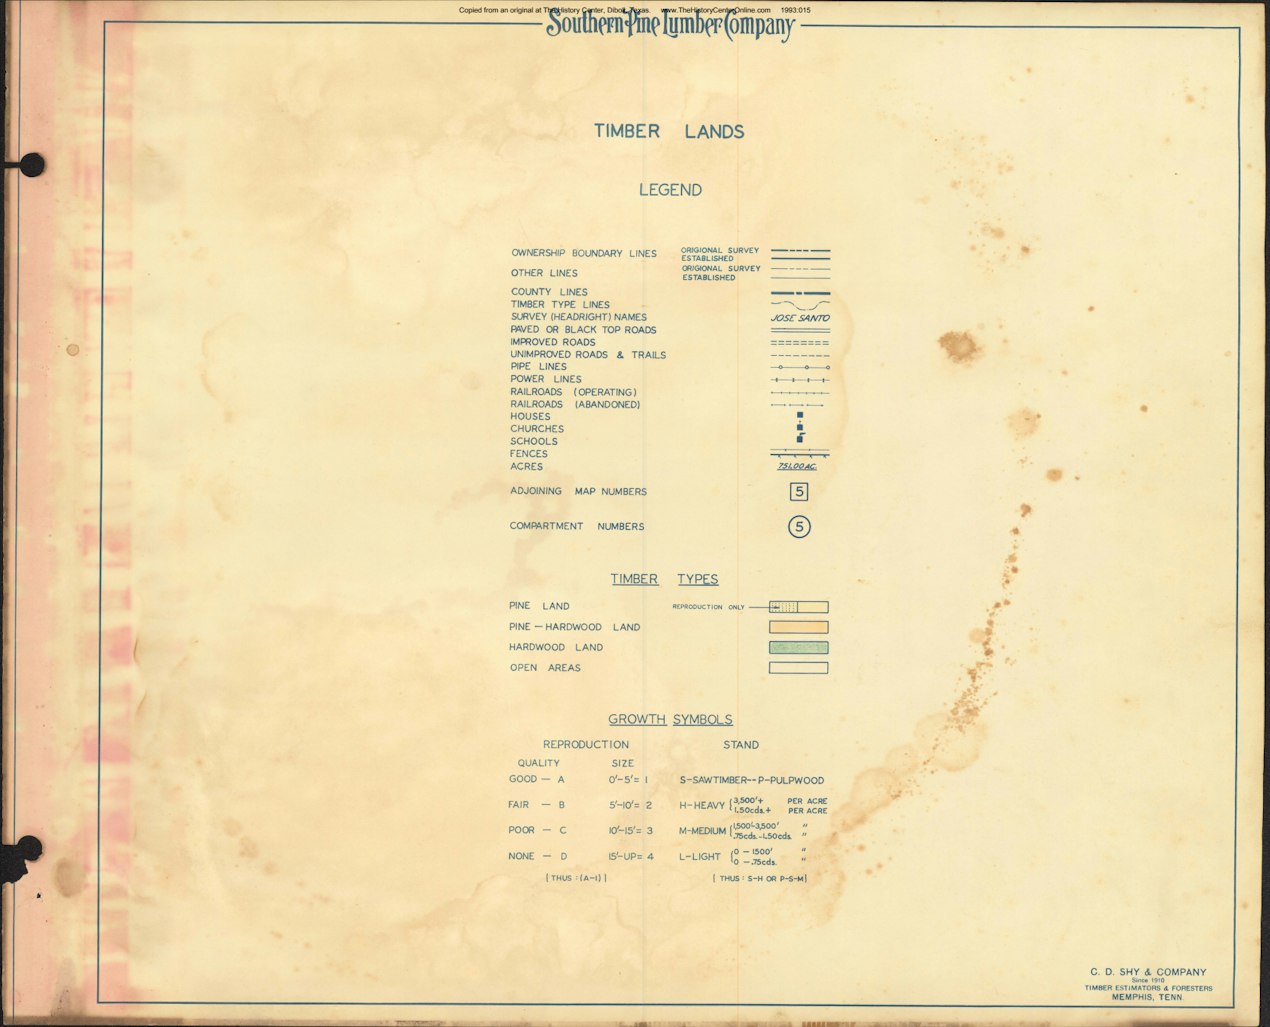 001 1955 Anderson County Timber Type Map Legend